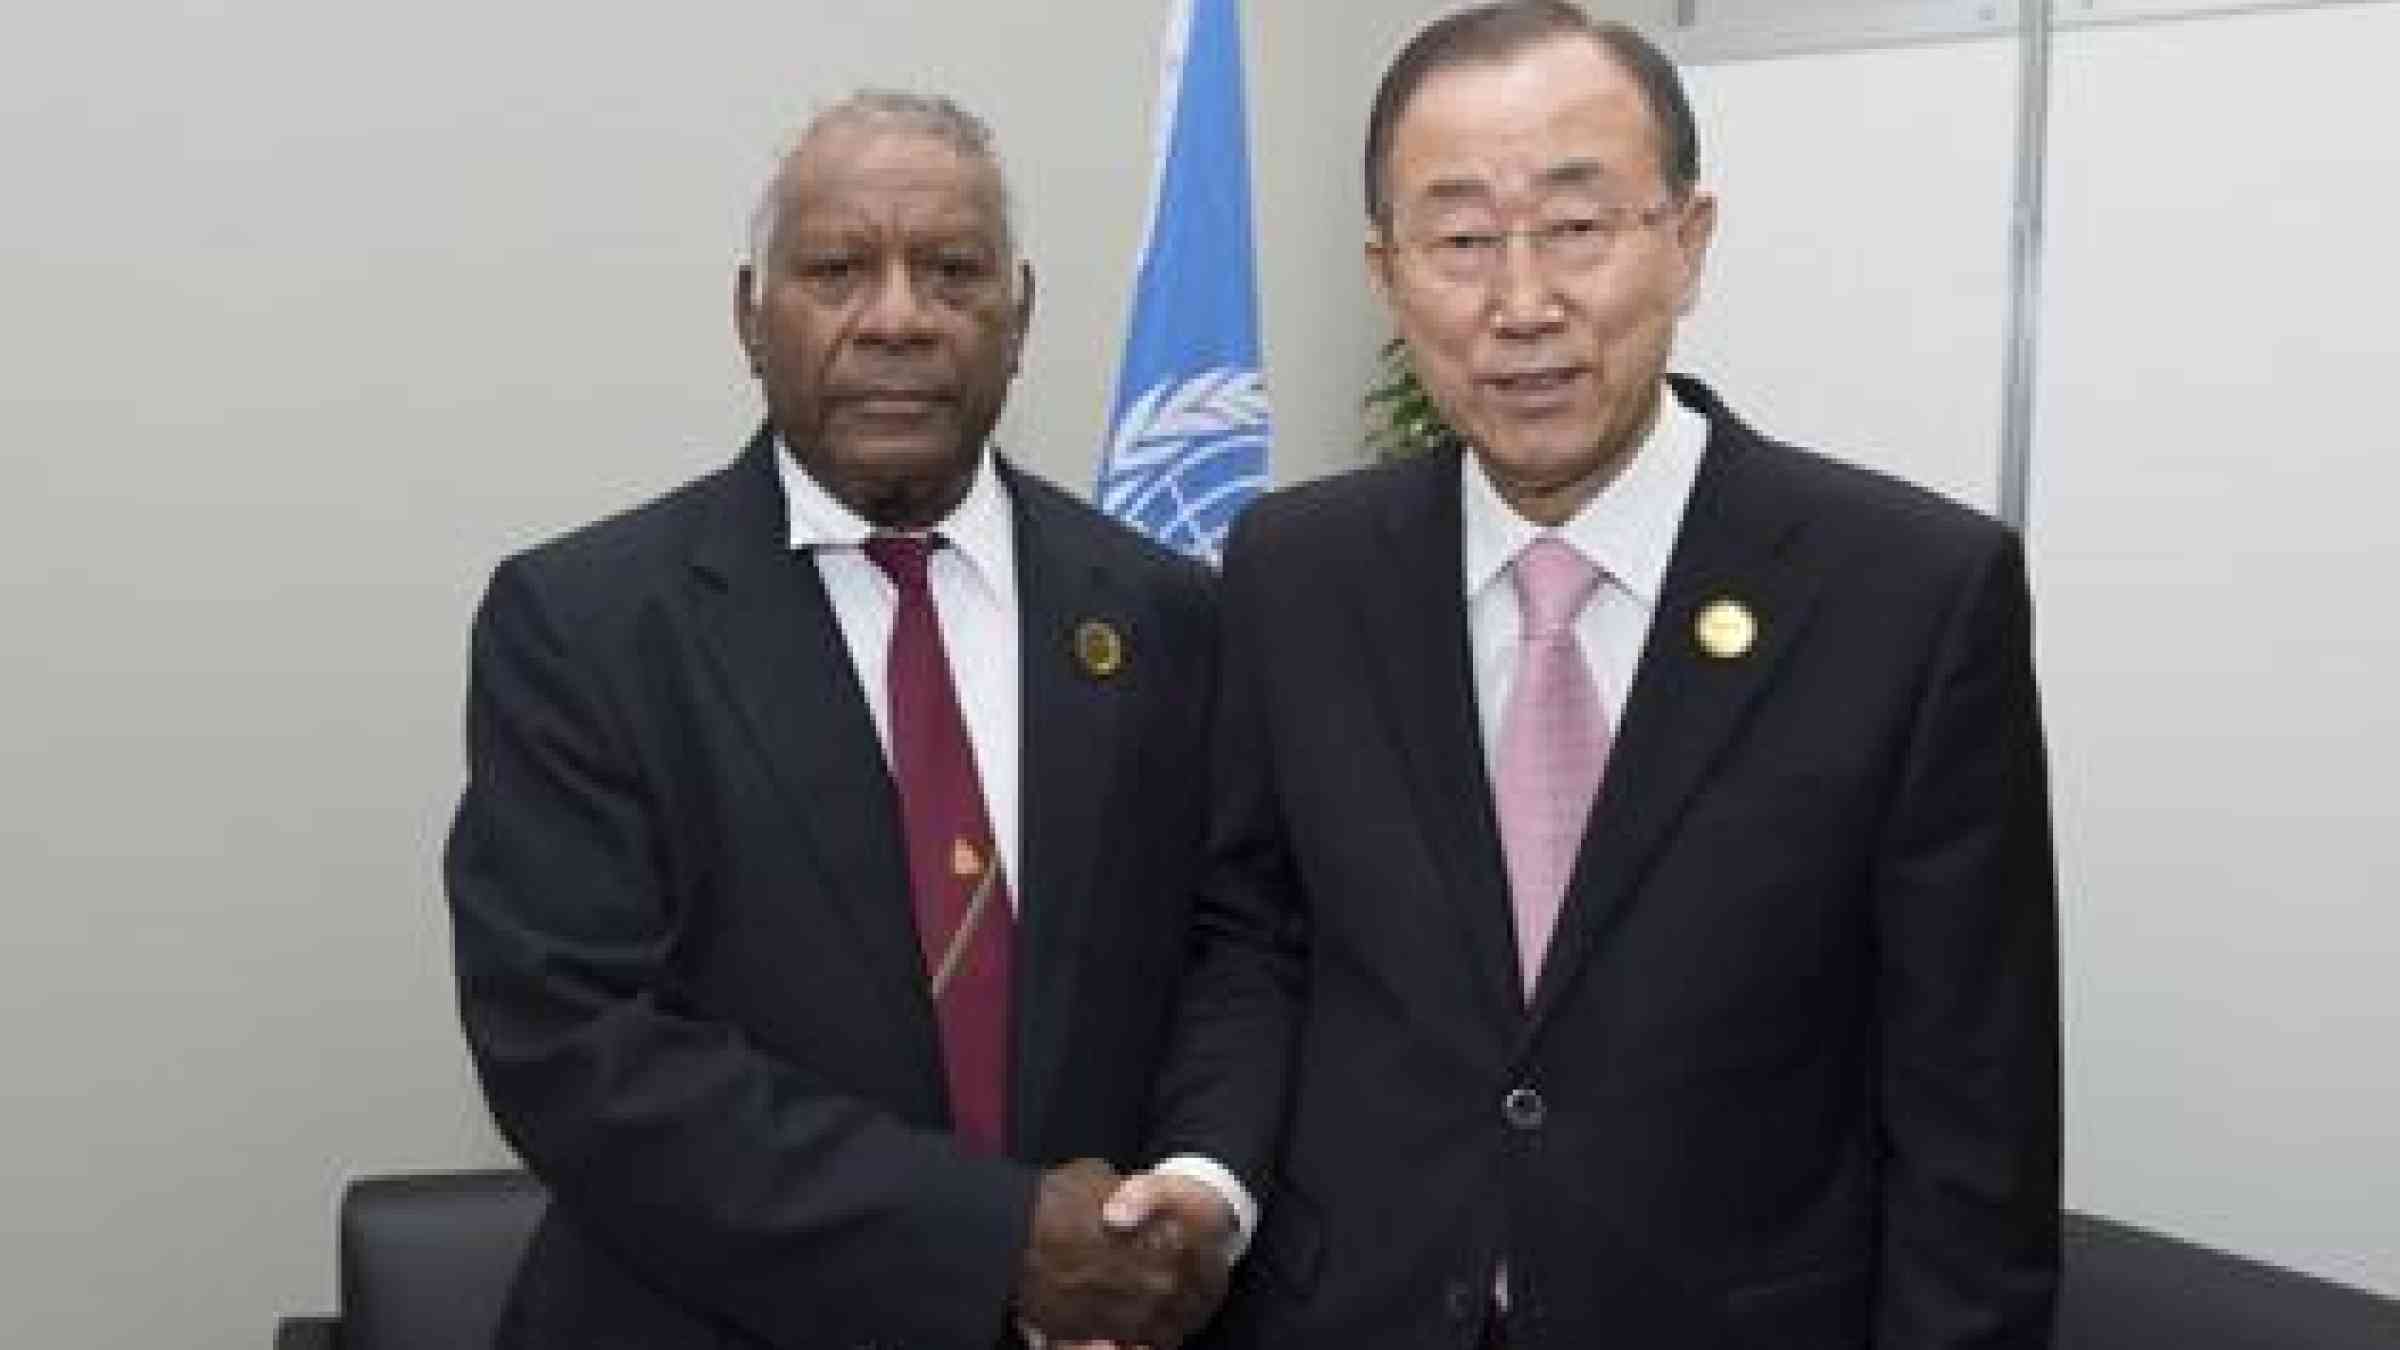 In his message for tomorrow's International Day for Disaster Reduction, the Secretary-General Ban Ki-moon, recalled his meeting with the President of Vanuatu, Solomon Lonsdale, at the Sendai World Conference the same day that Cyclone Pam hit the country. (Photo: UNISDR)